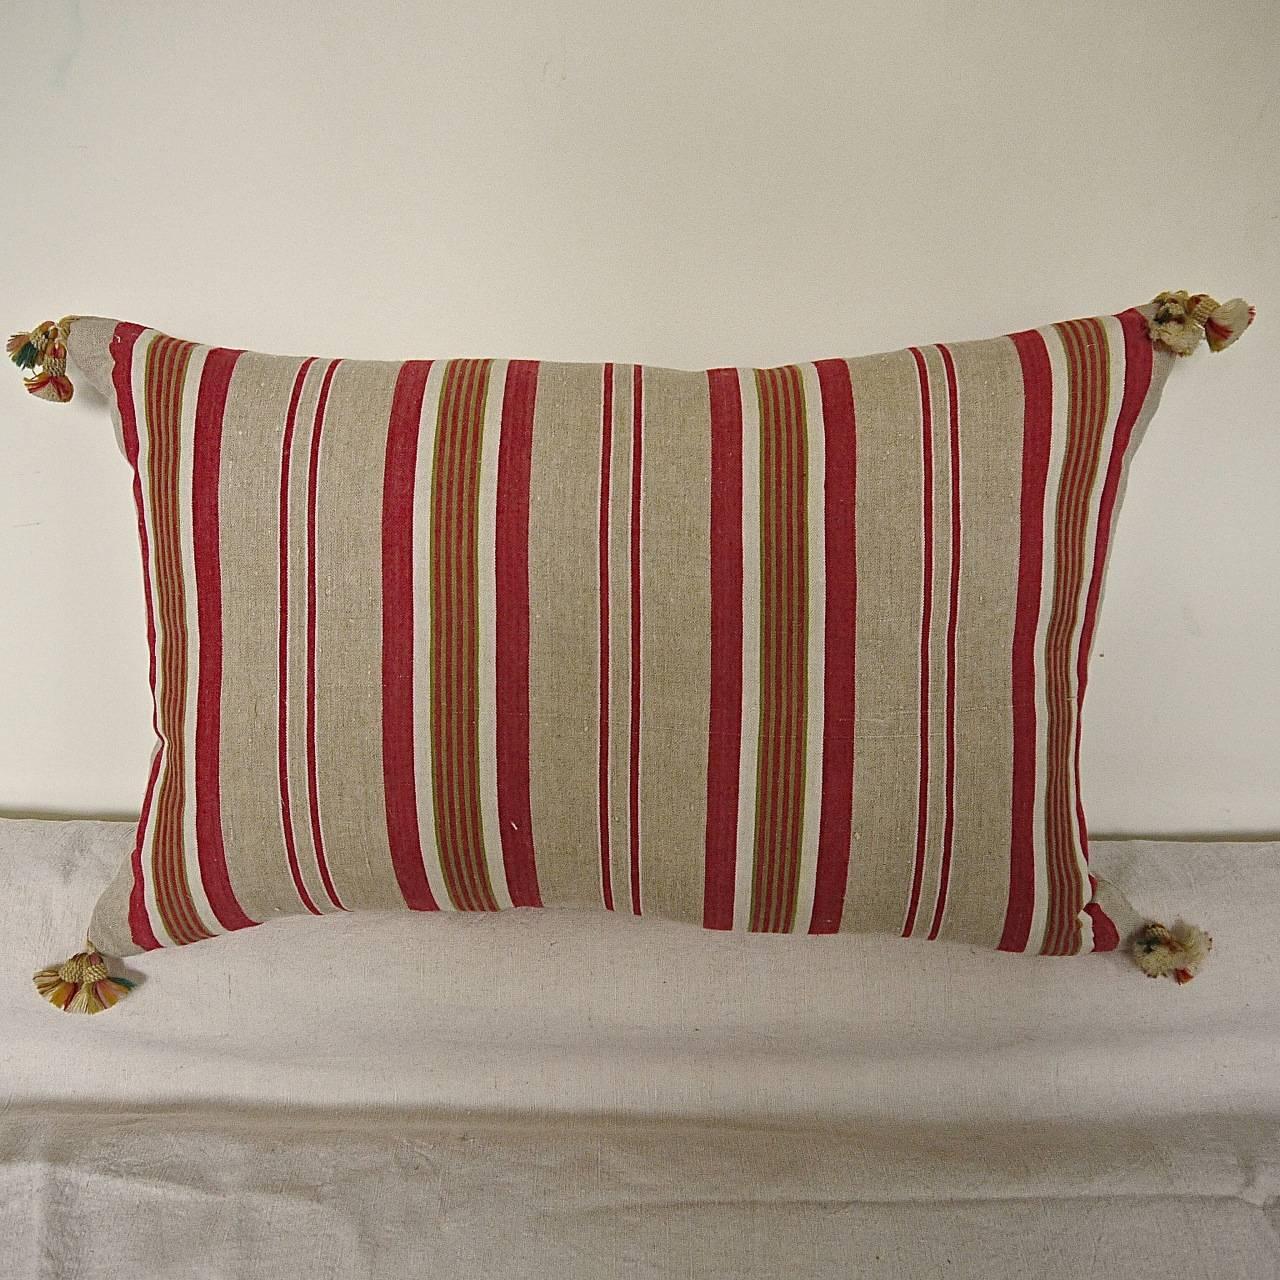 French linen ticking cushion in stripes of red, beige and a thin khaki green. With 19th century French wool tassels on each corner. Slips-stitched closed with a duck feather insert.